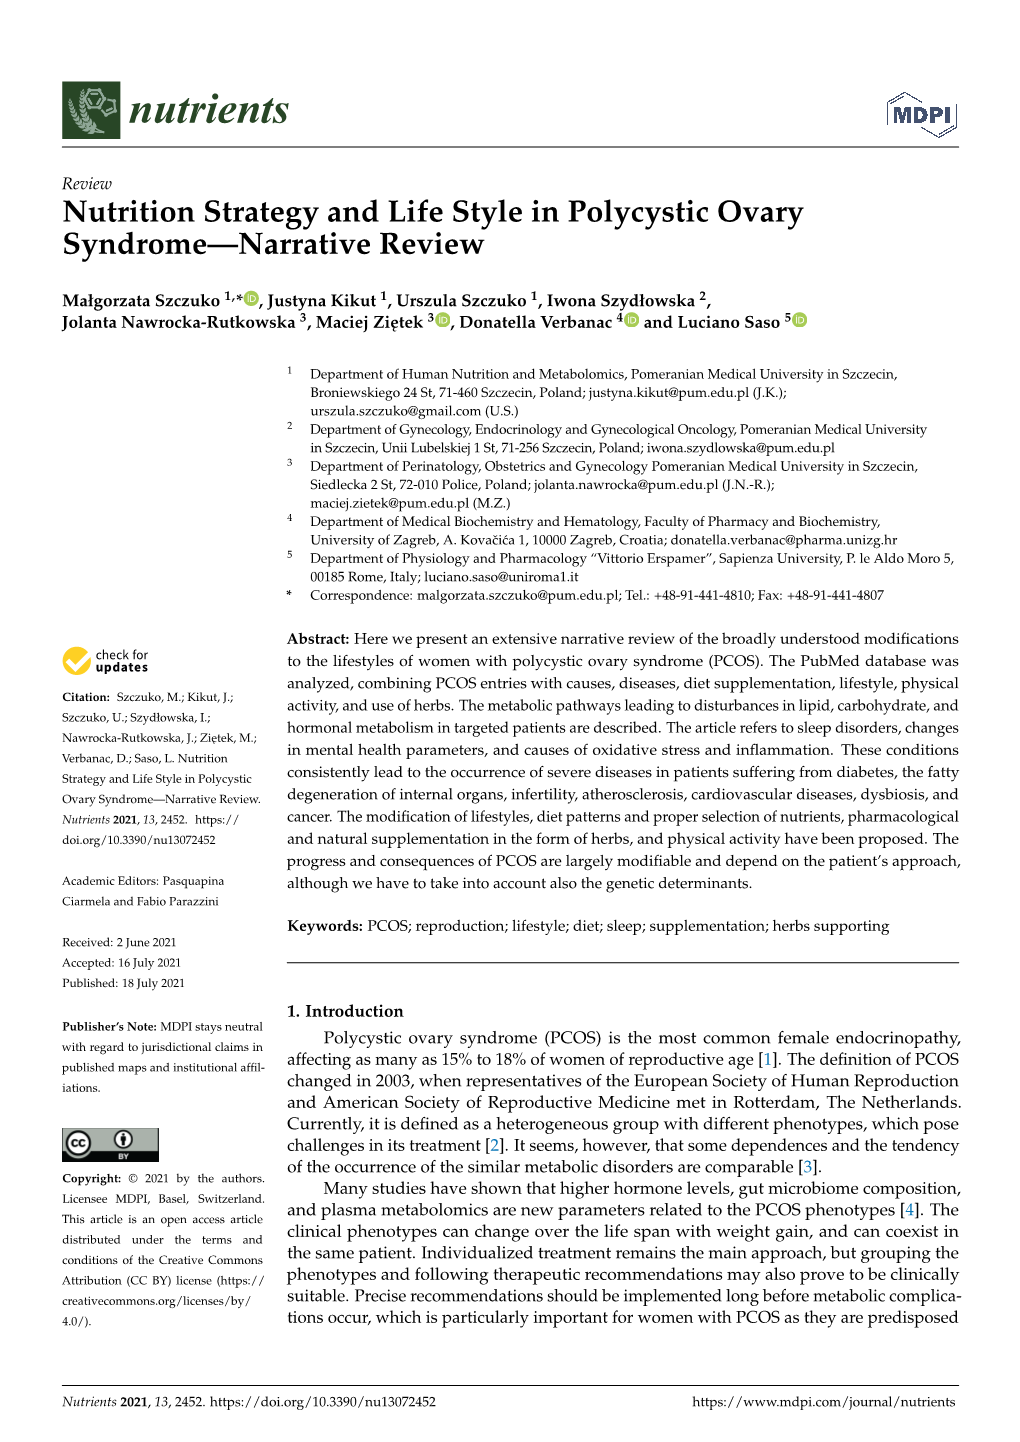 Nutrition Strategy and Life Style in Polycystic Ovary Syndrome—Narrative Review